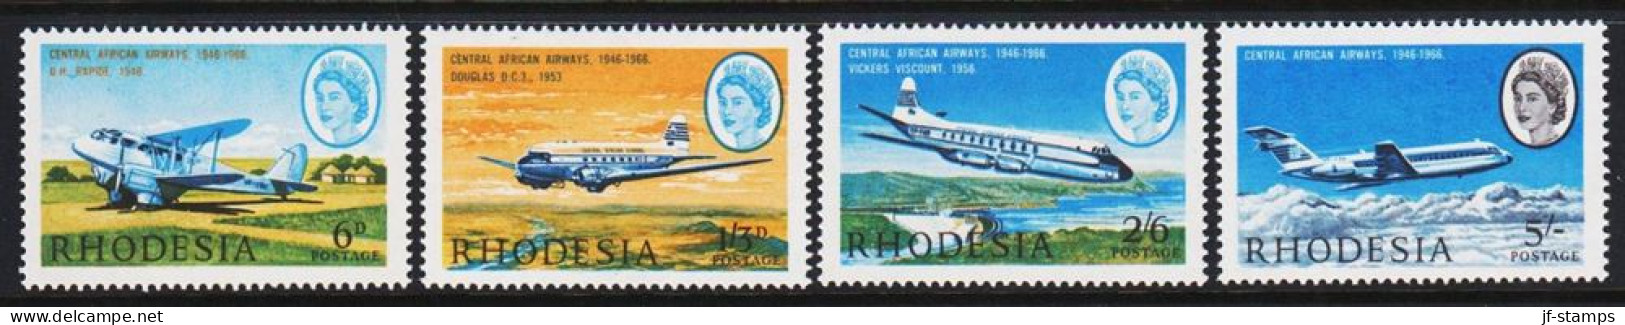 1966. RHODESIA. CENTRAL AFRICAN AIRWAYS. Complete Set With 4 Stamps Never Hinged.  (Michel 42-45) - JF545283 - Rhodesia (1964-1980)